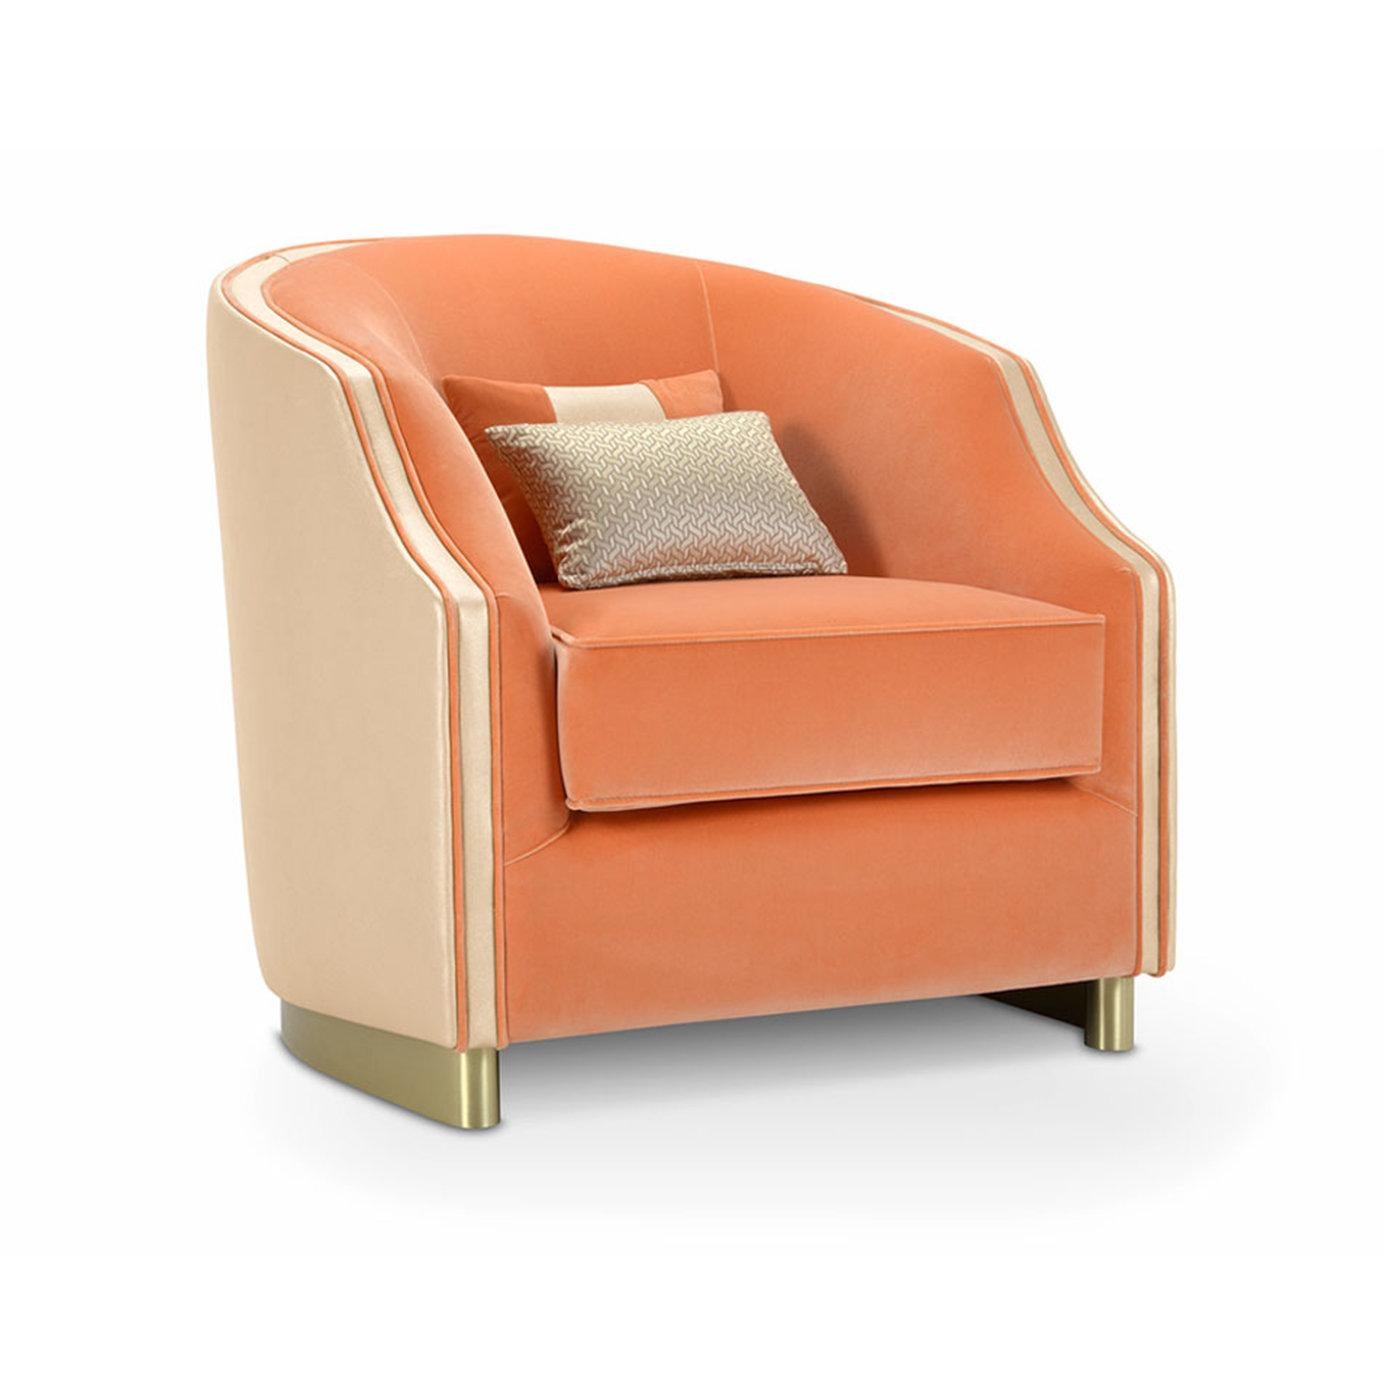 Cleio, one of the nine mues in Greek mythology, inspired the elegant collection including this lively, handcrafted armchair. Also available in a bed variant upon request, it offers a cozy nest where sartorial refinement couples with utmost comfort